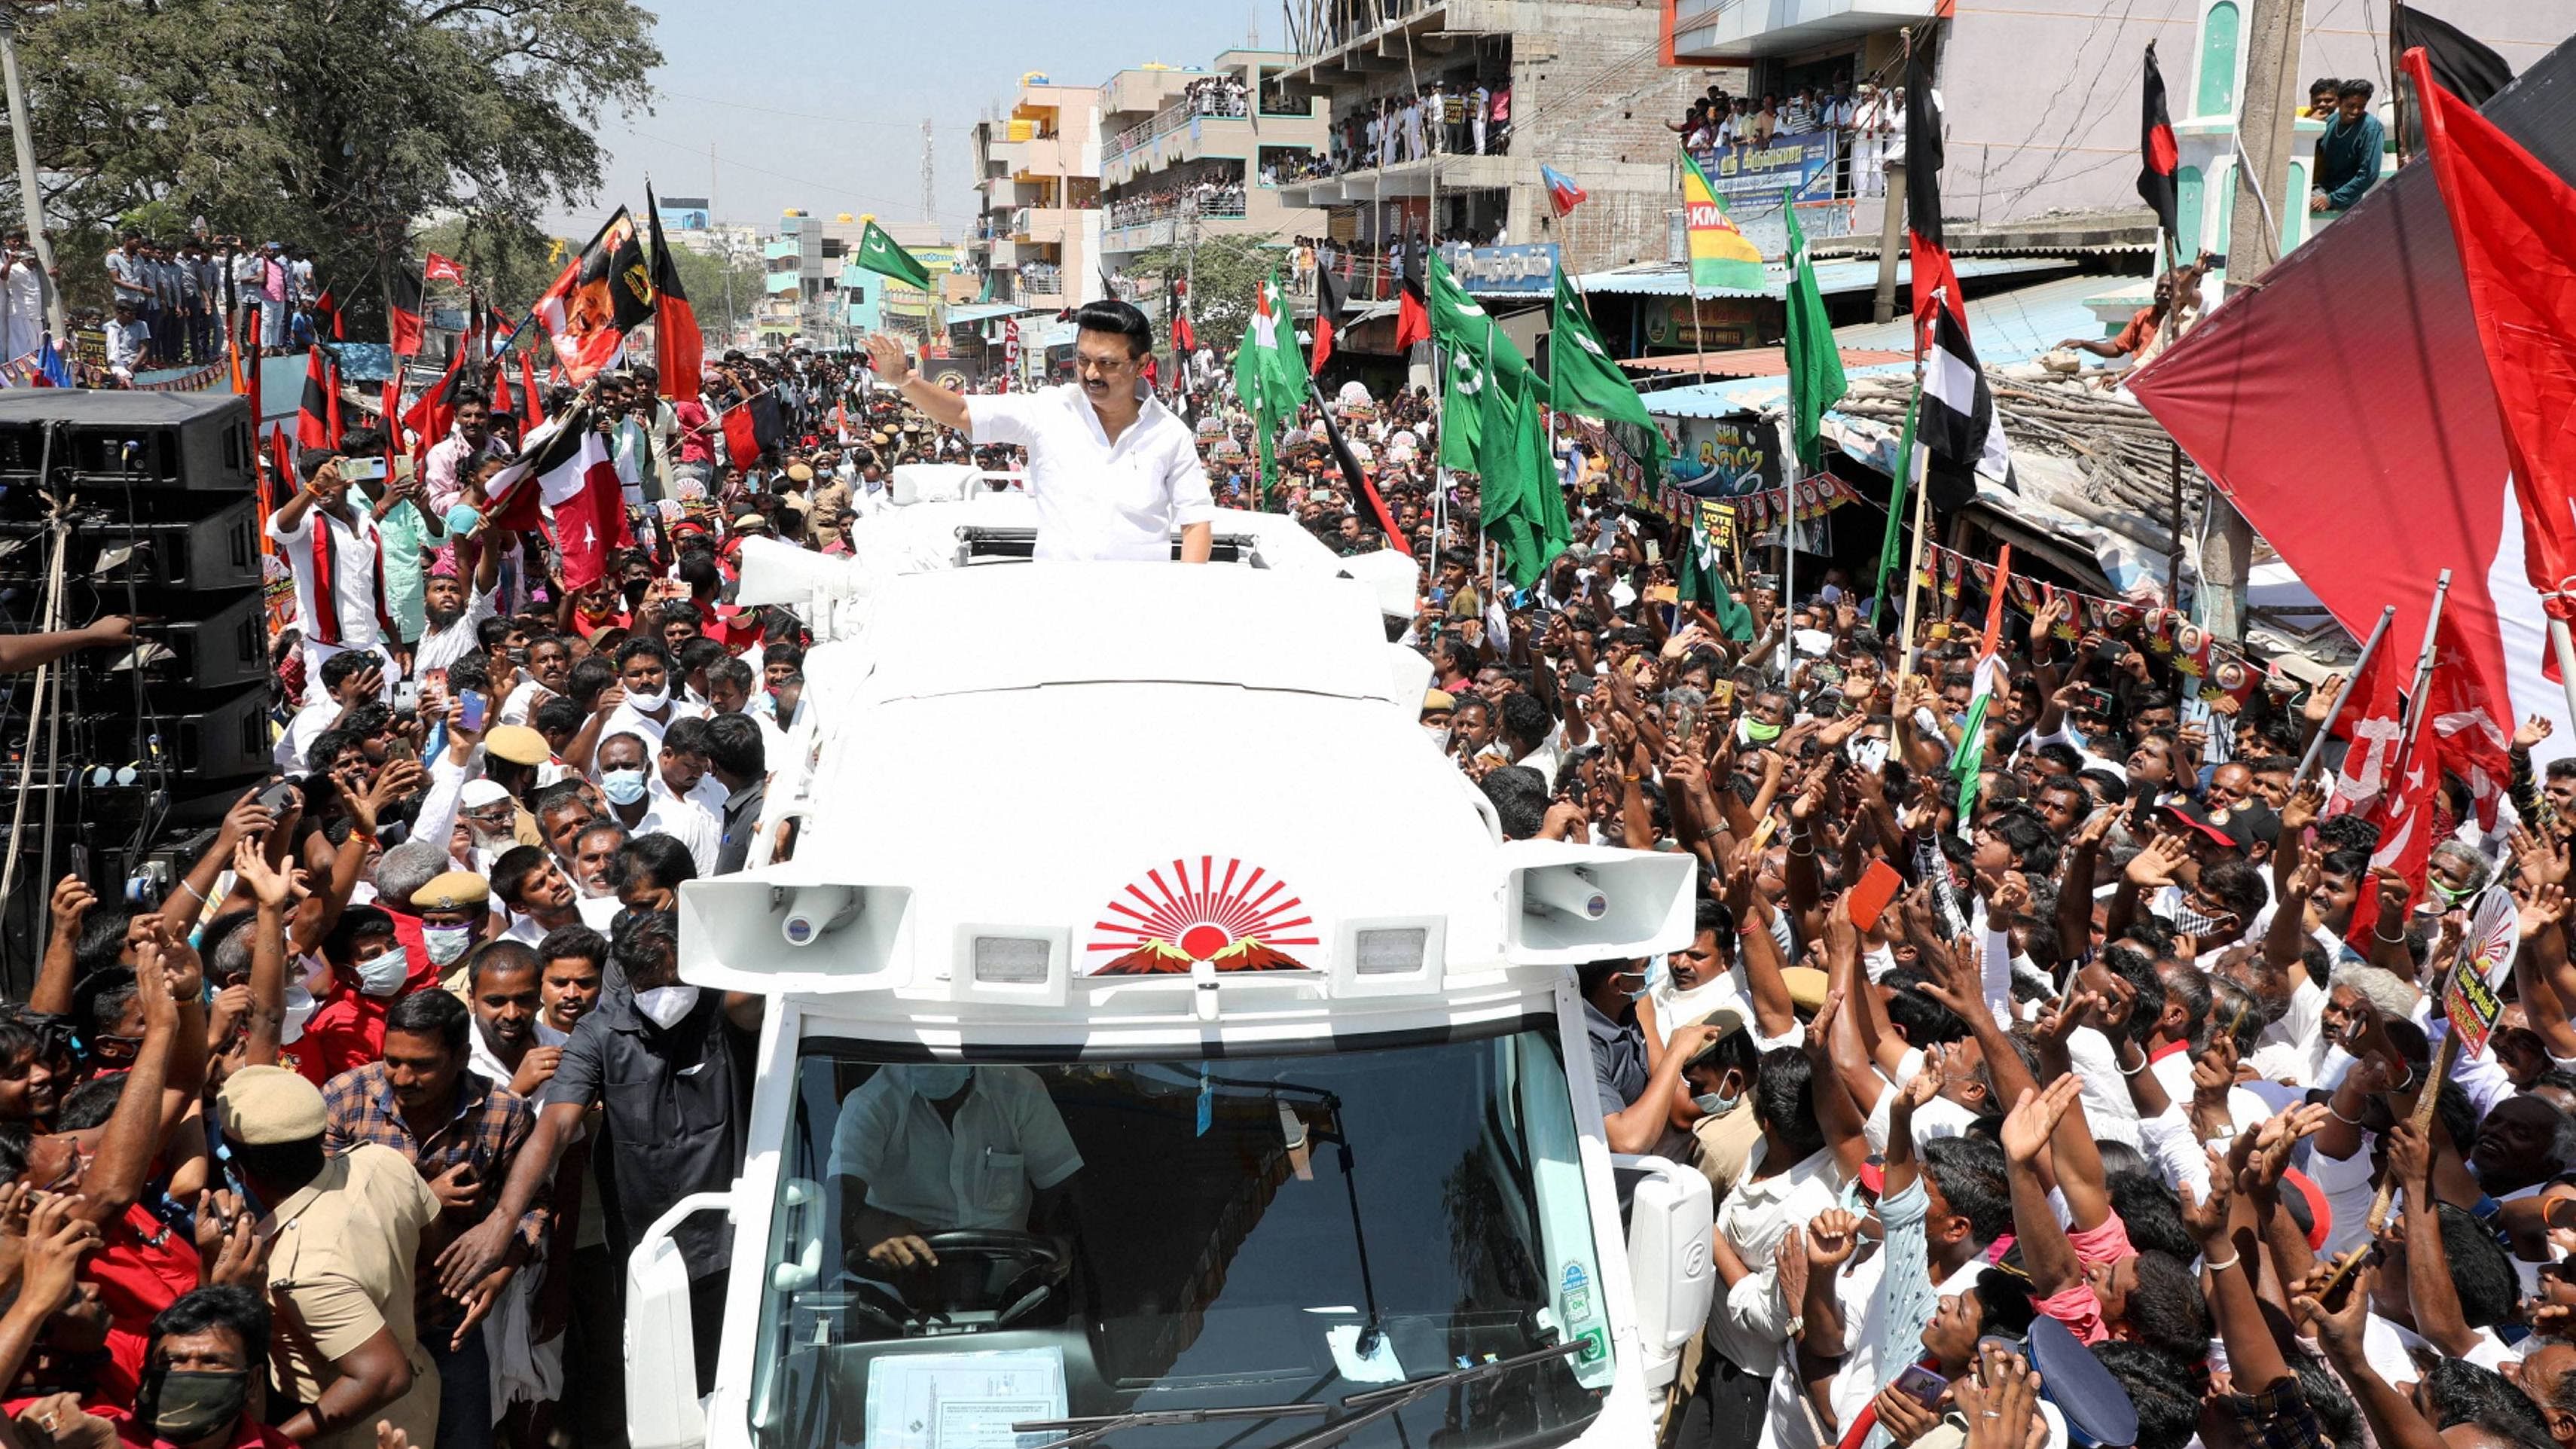 DMK leader MK Stalin waves at supporters during his election roadshow at Soolagiri ahead of Assembly polls. Credit: PTI File Photo